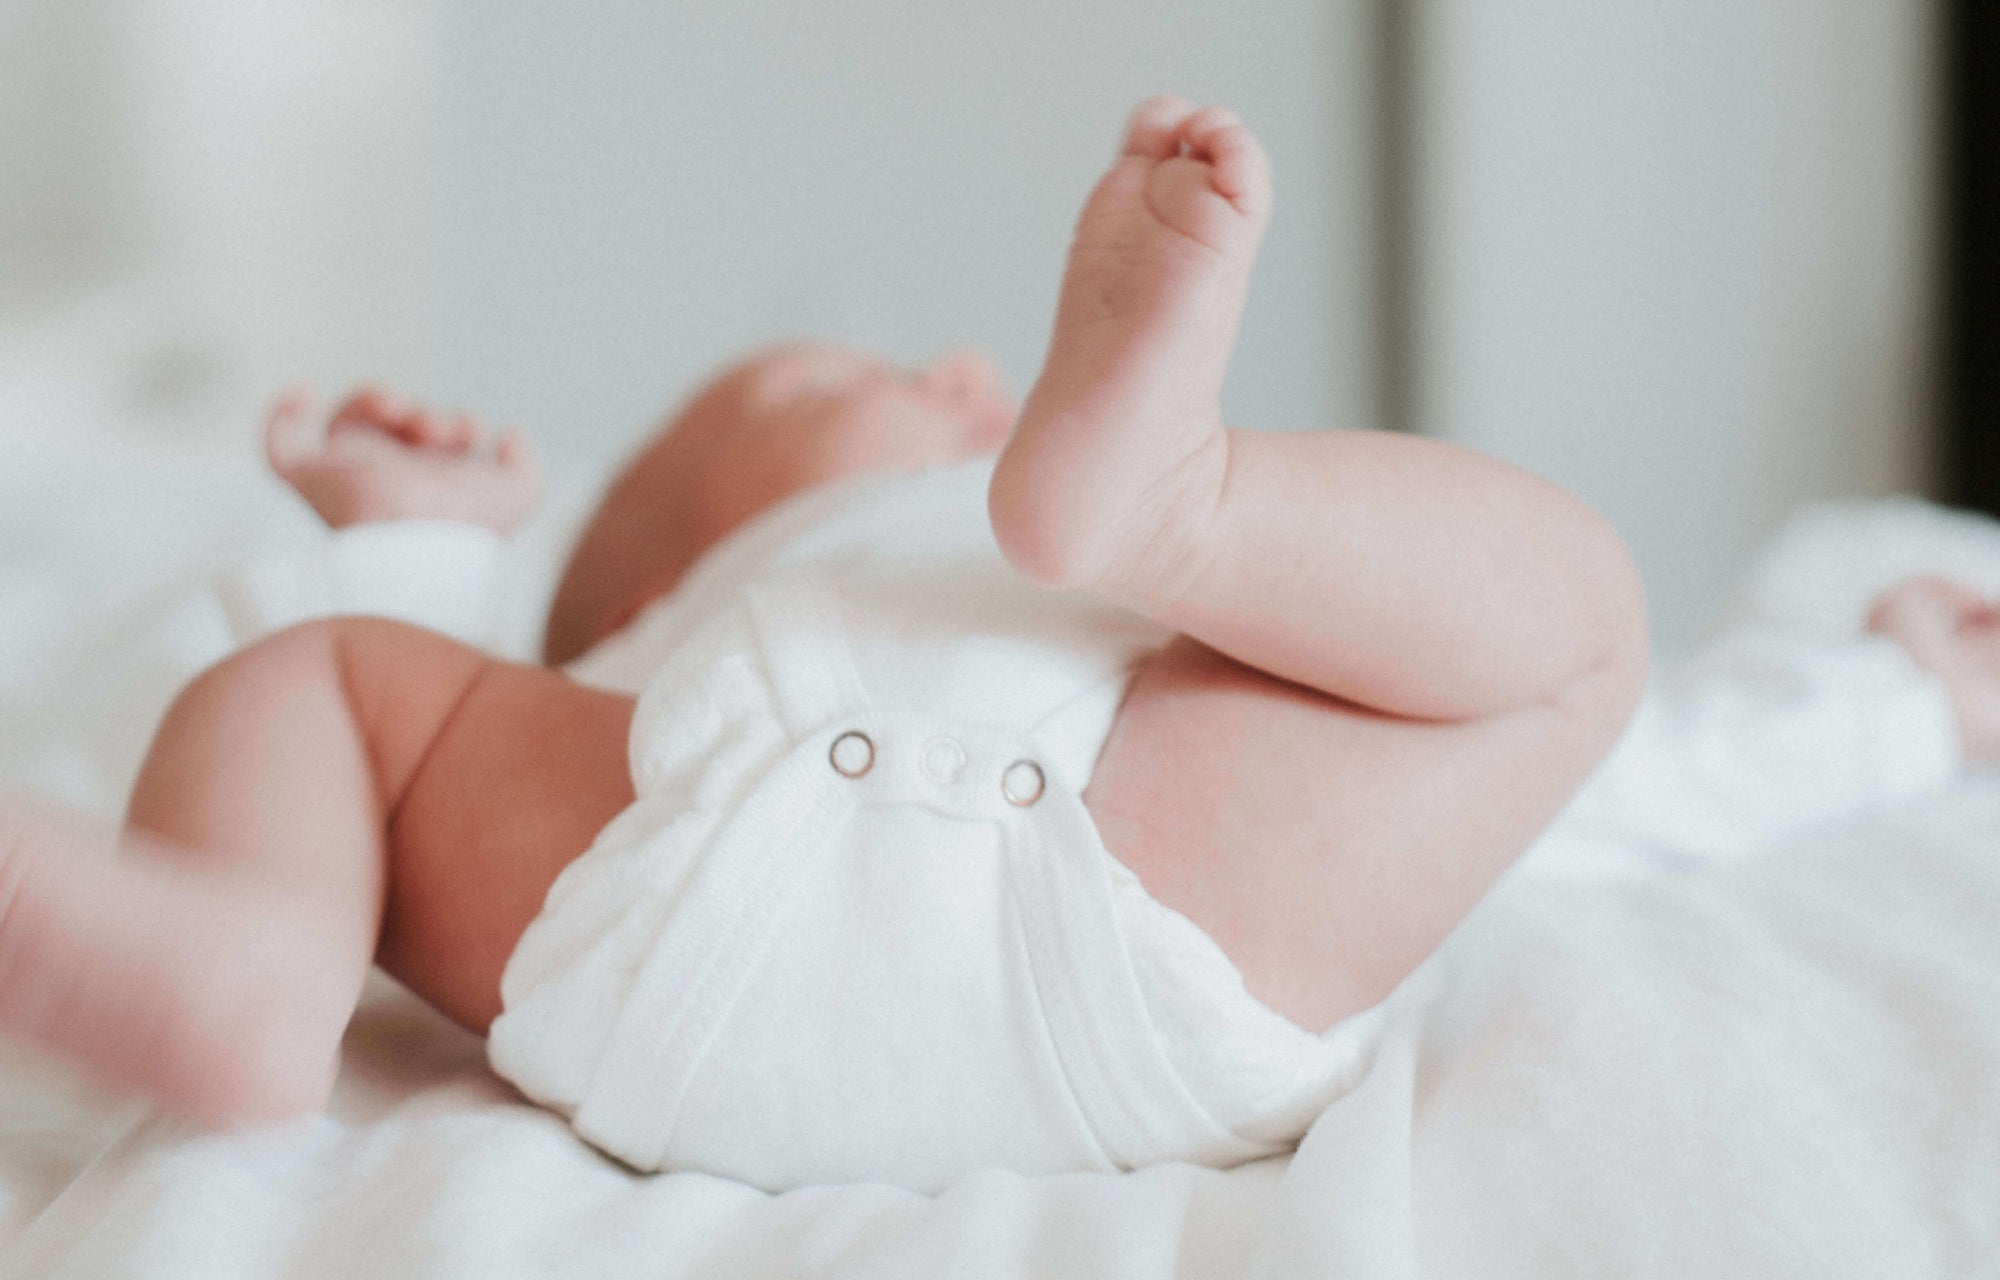 Facts About Diapers - How many times per day should the baby be changed?